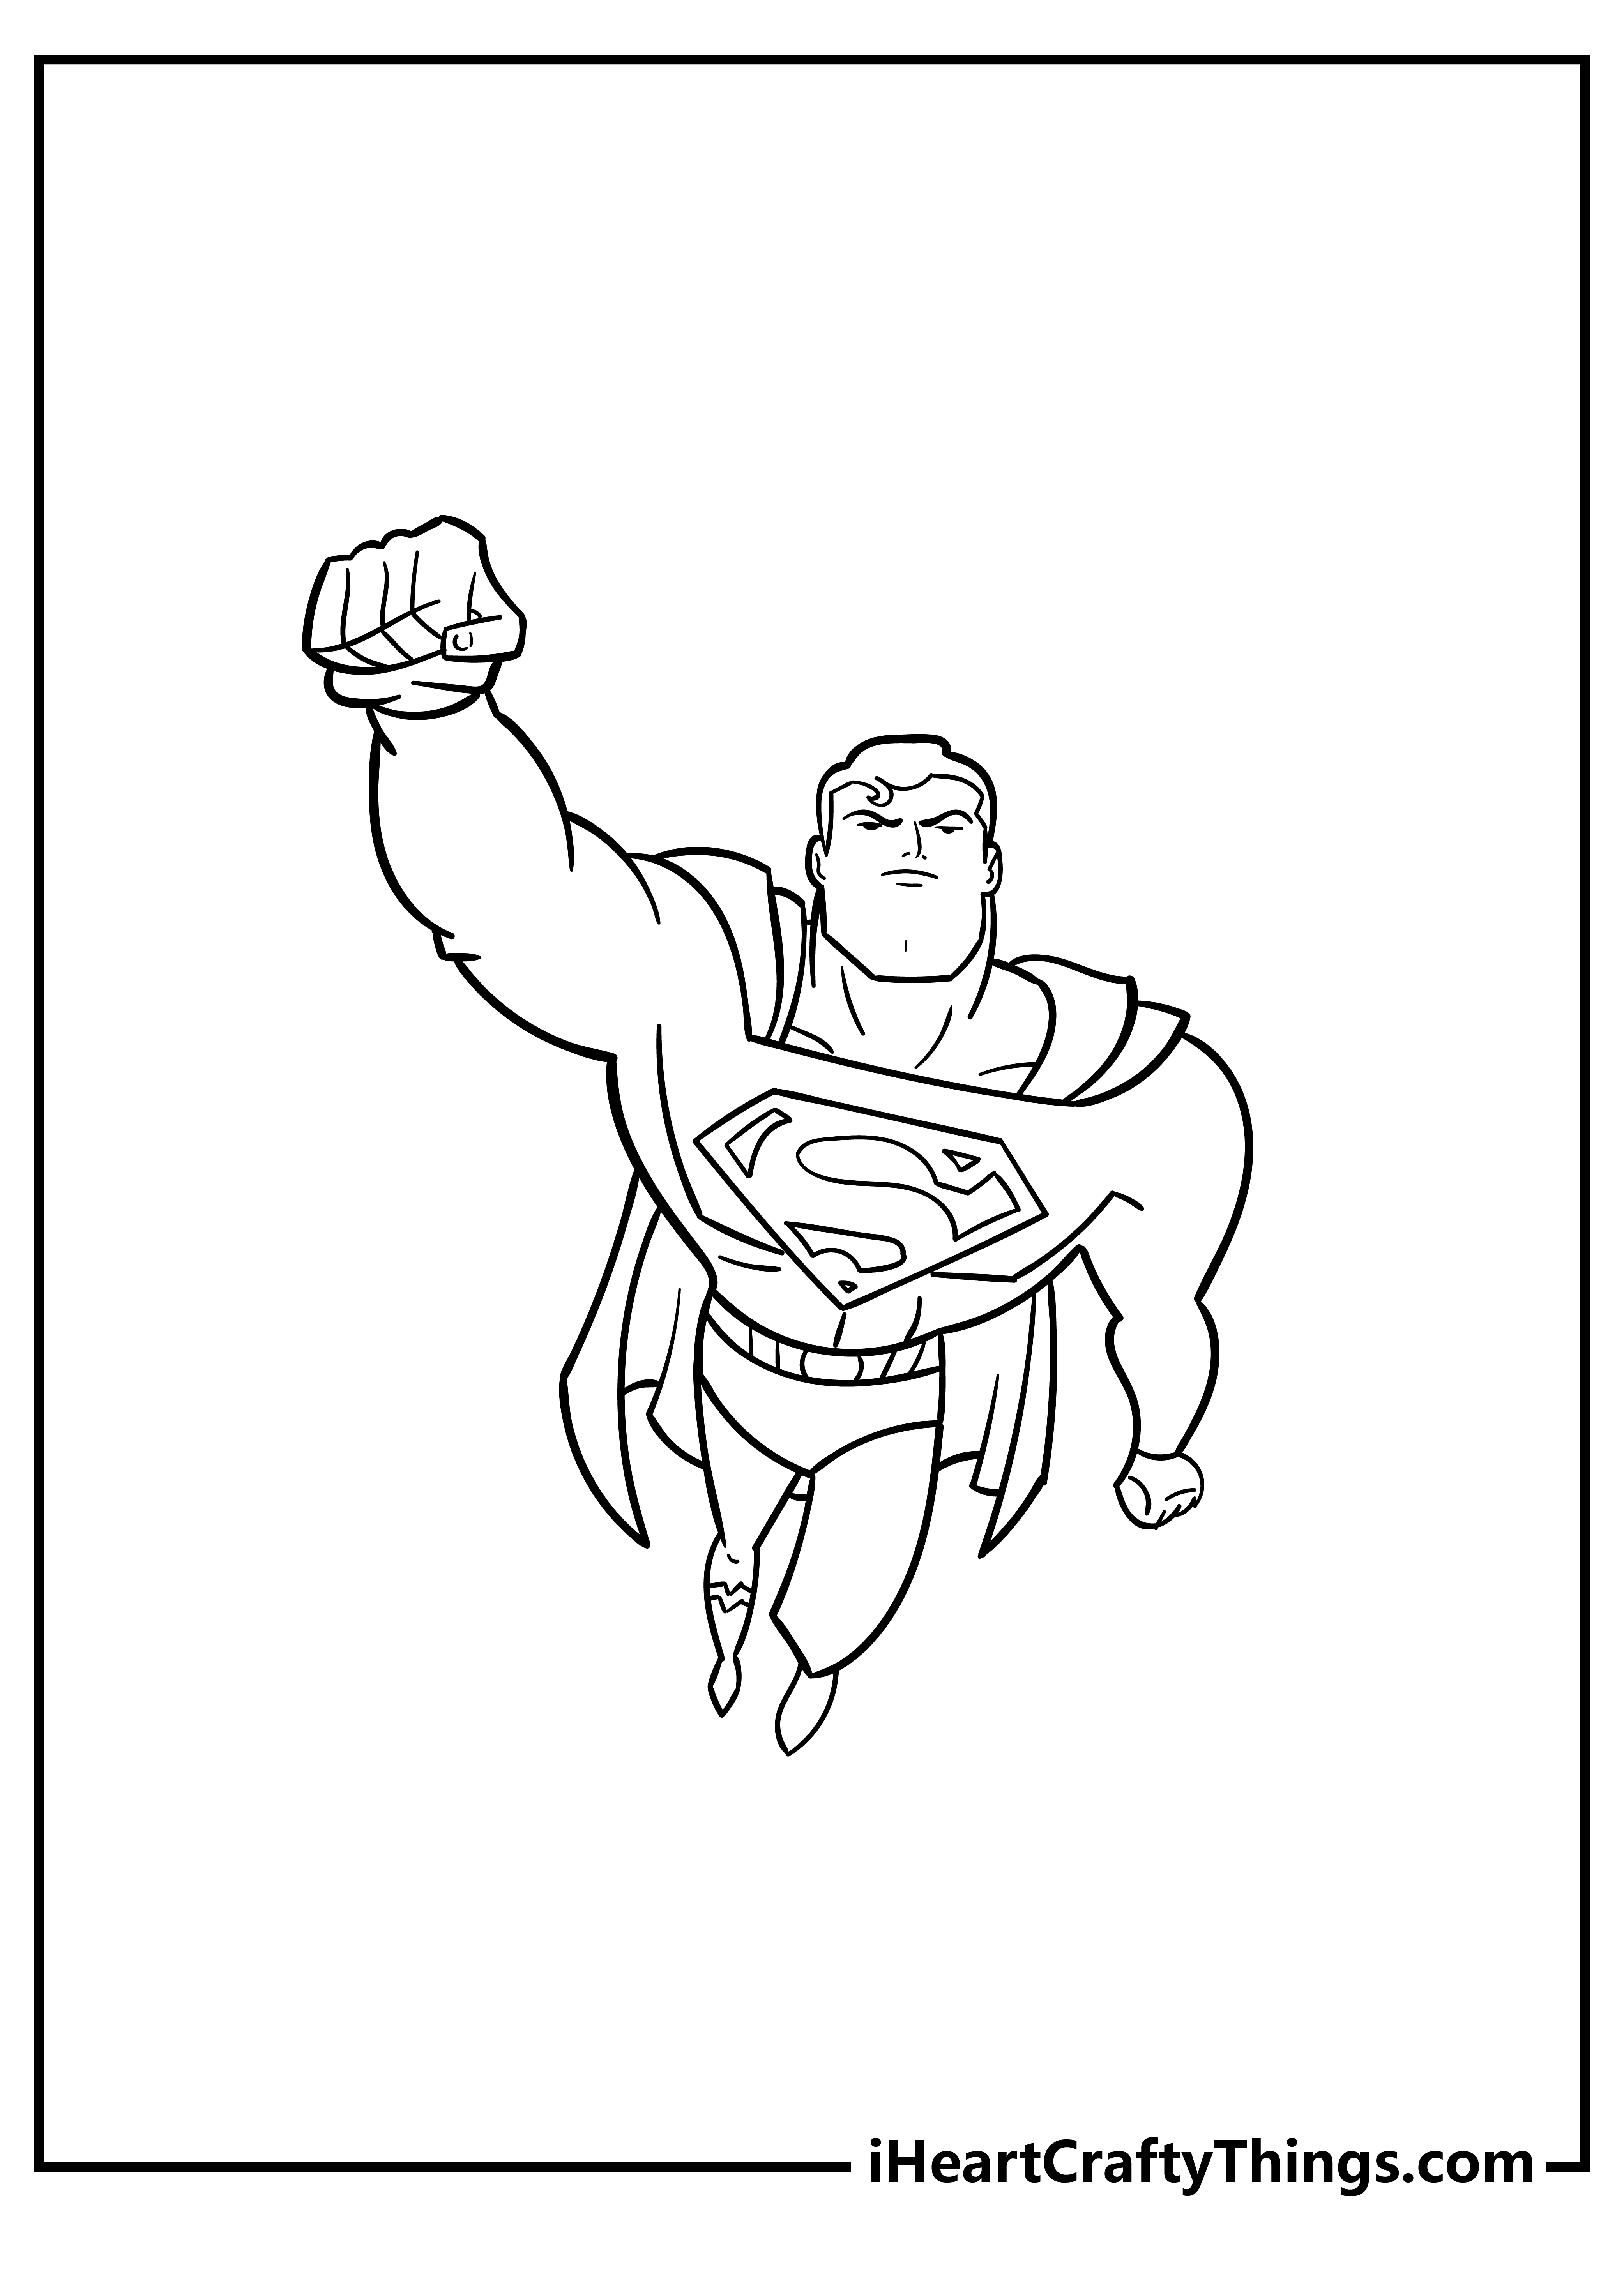 Superman Coloring Pages free pdf download